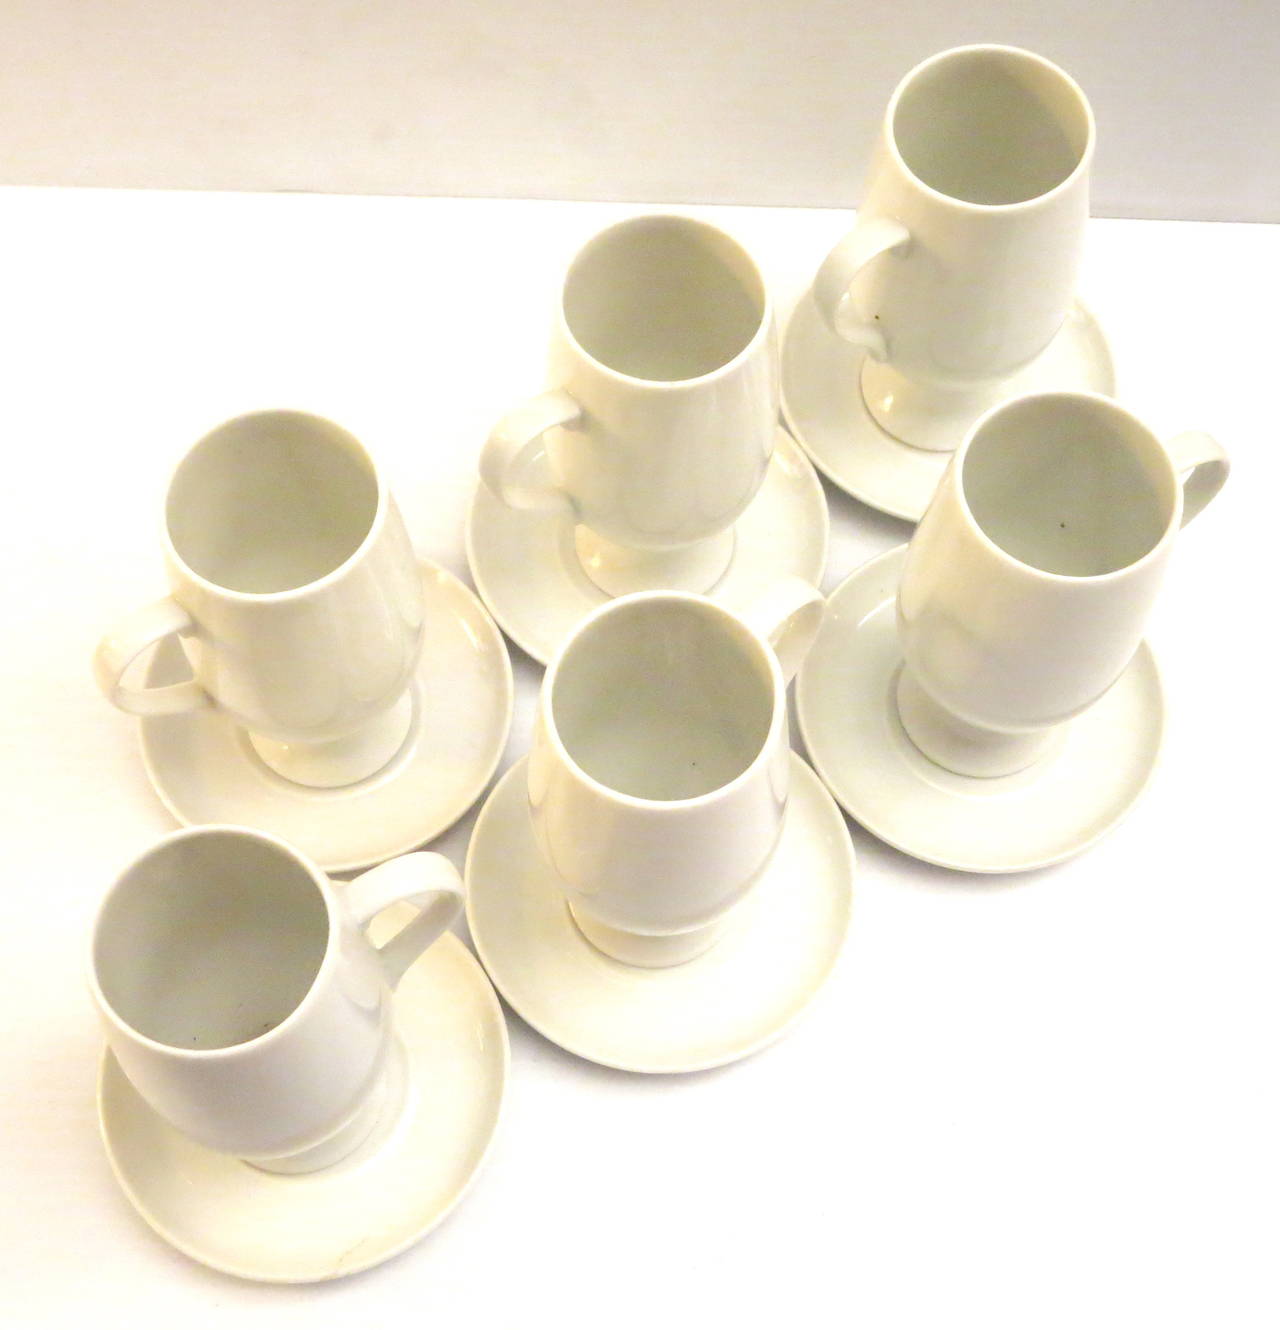 Mid-Century Modern Set of Six Espresso Cups and Saucers Designed by Lagardo Tackett for Schmid